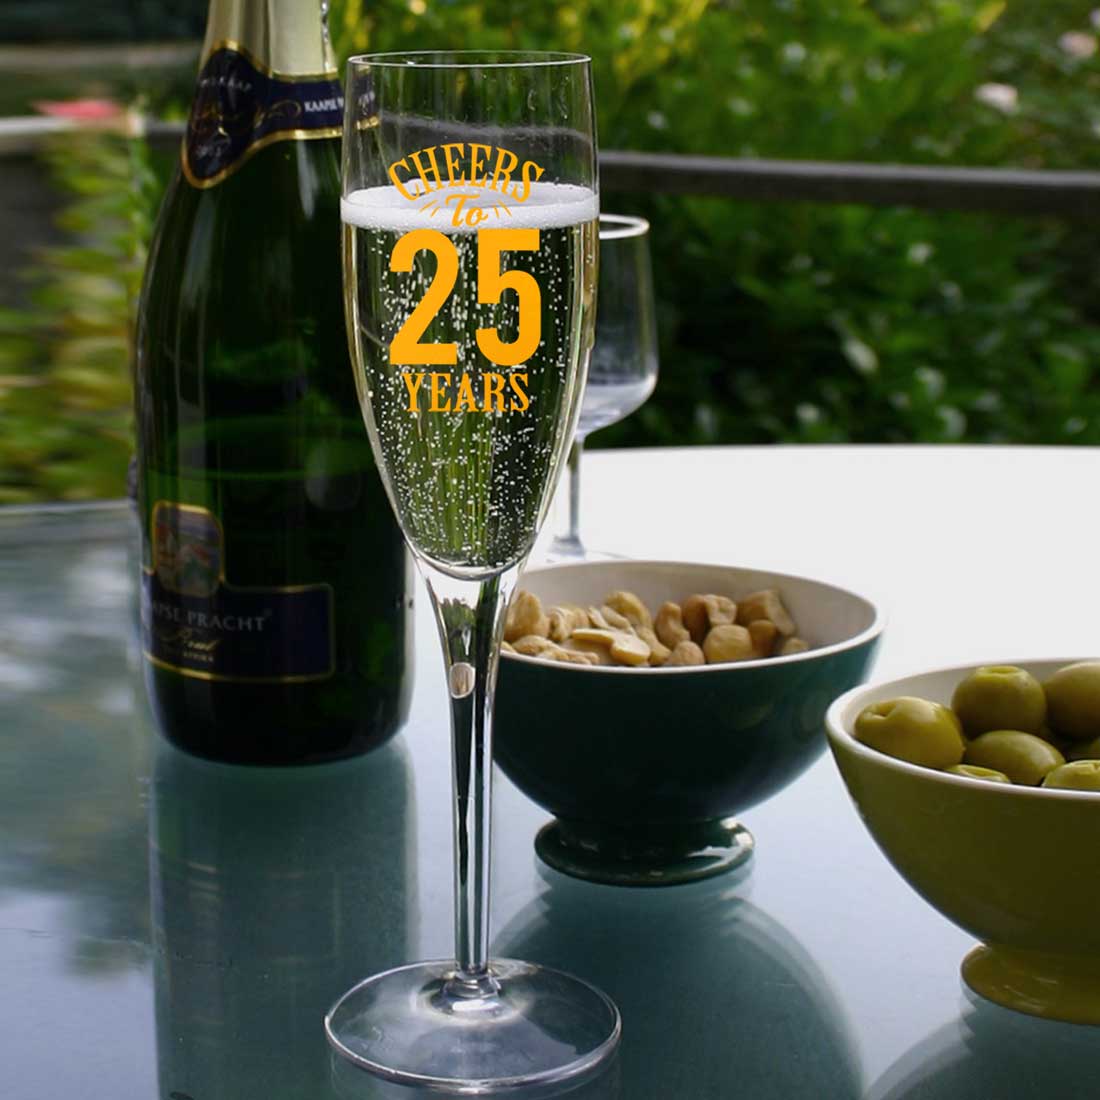 Personalized Champagne Glass Birthday Gifts Idea - Add Any Number